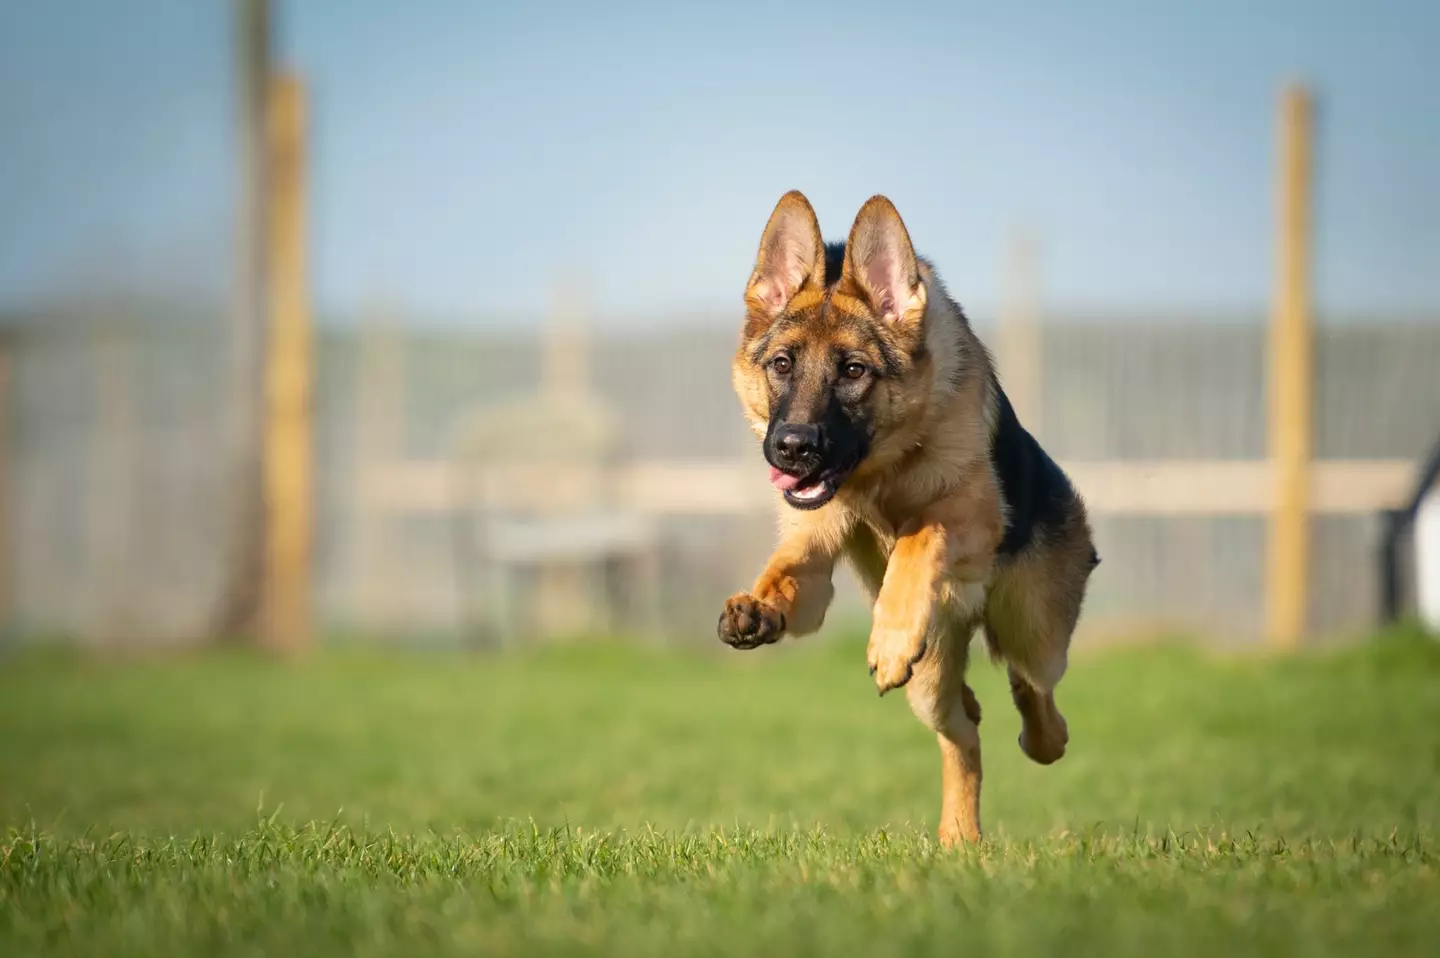 German Shepherds can be temperamental and hard to manage.